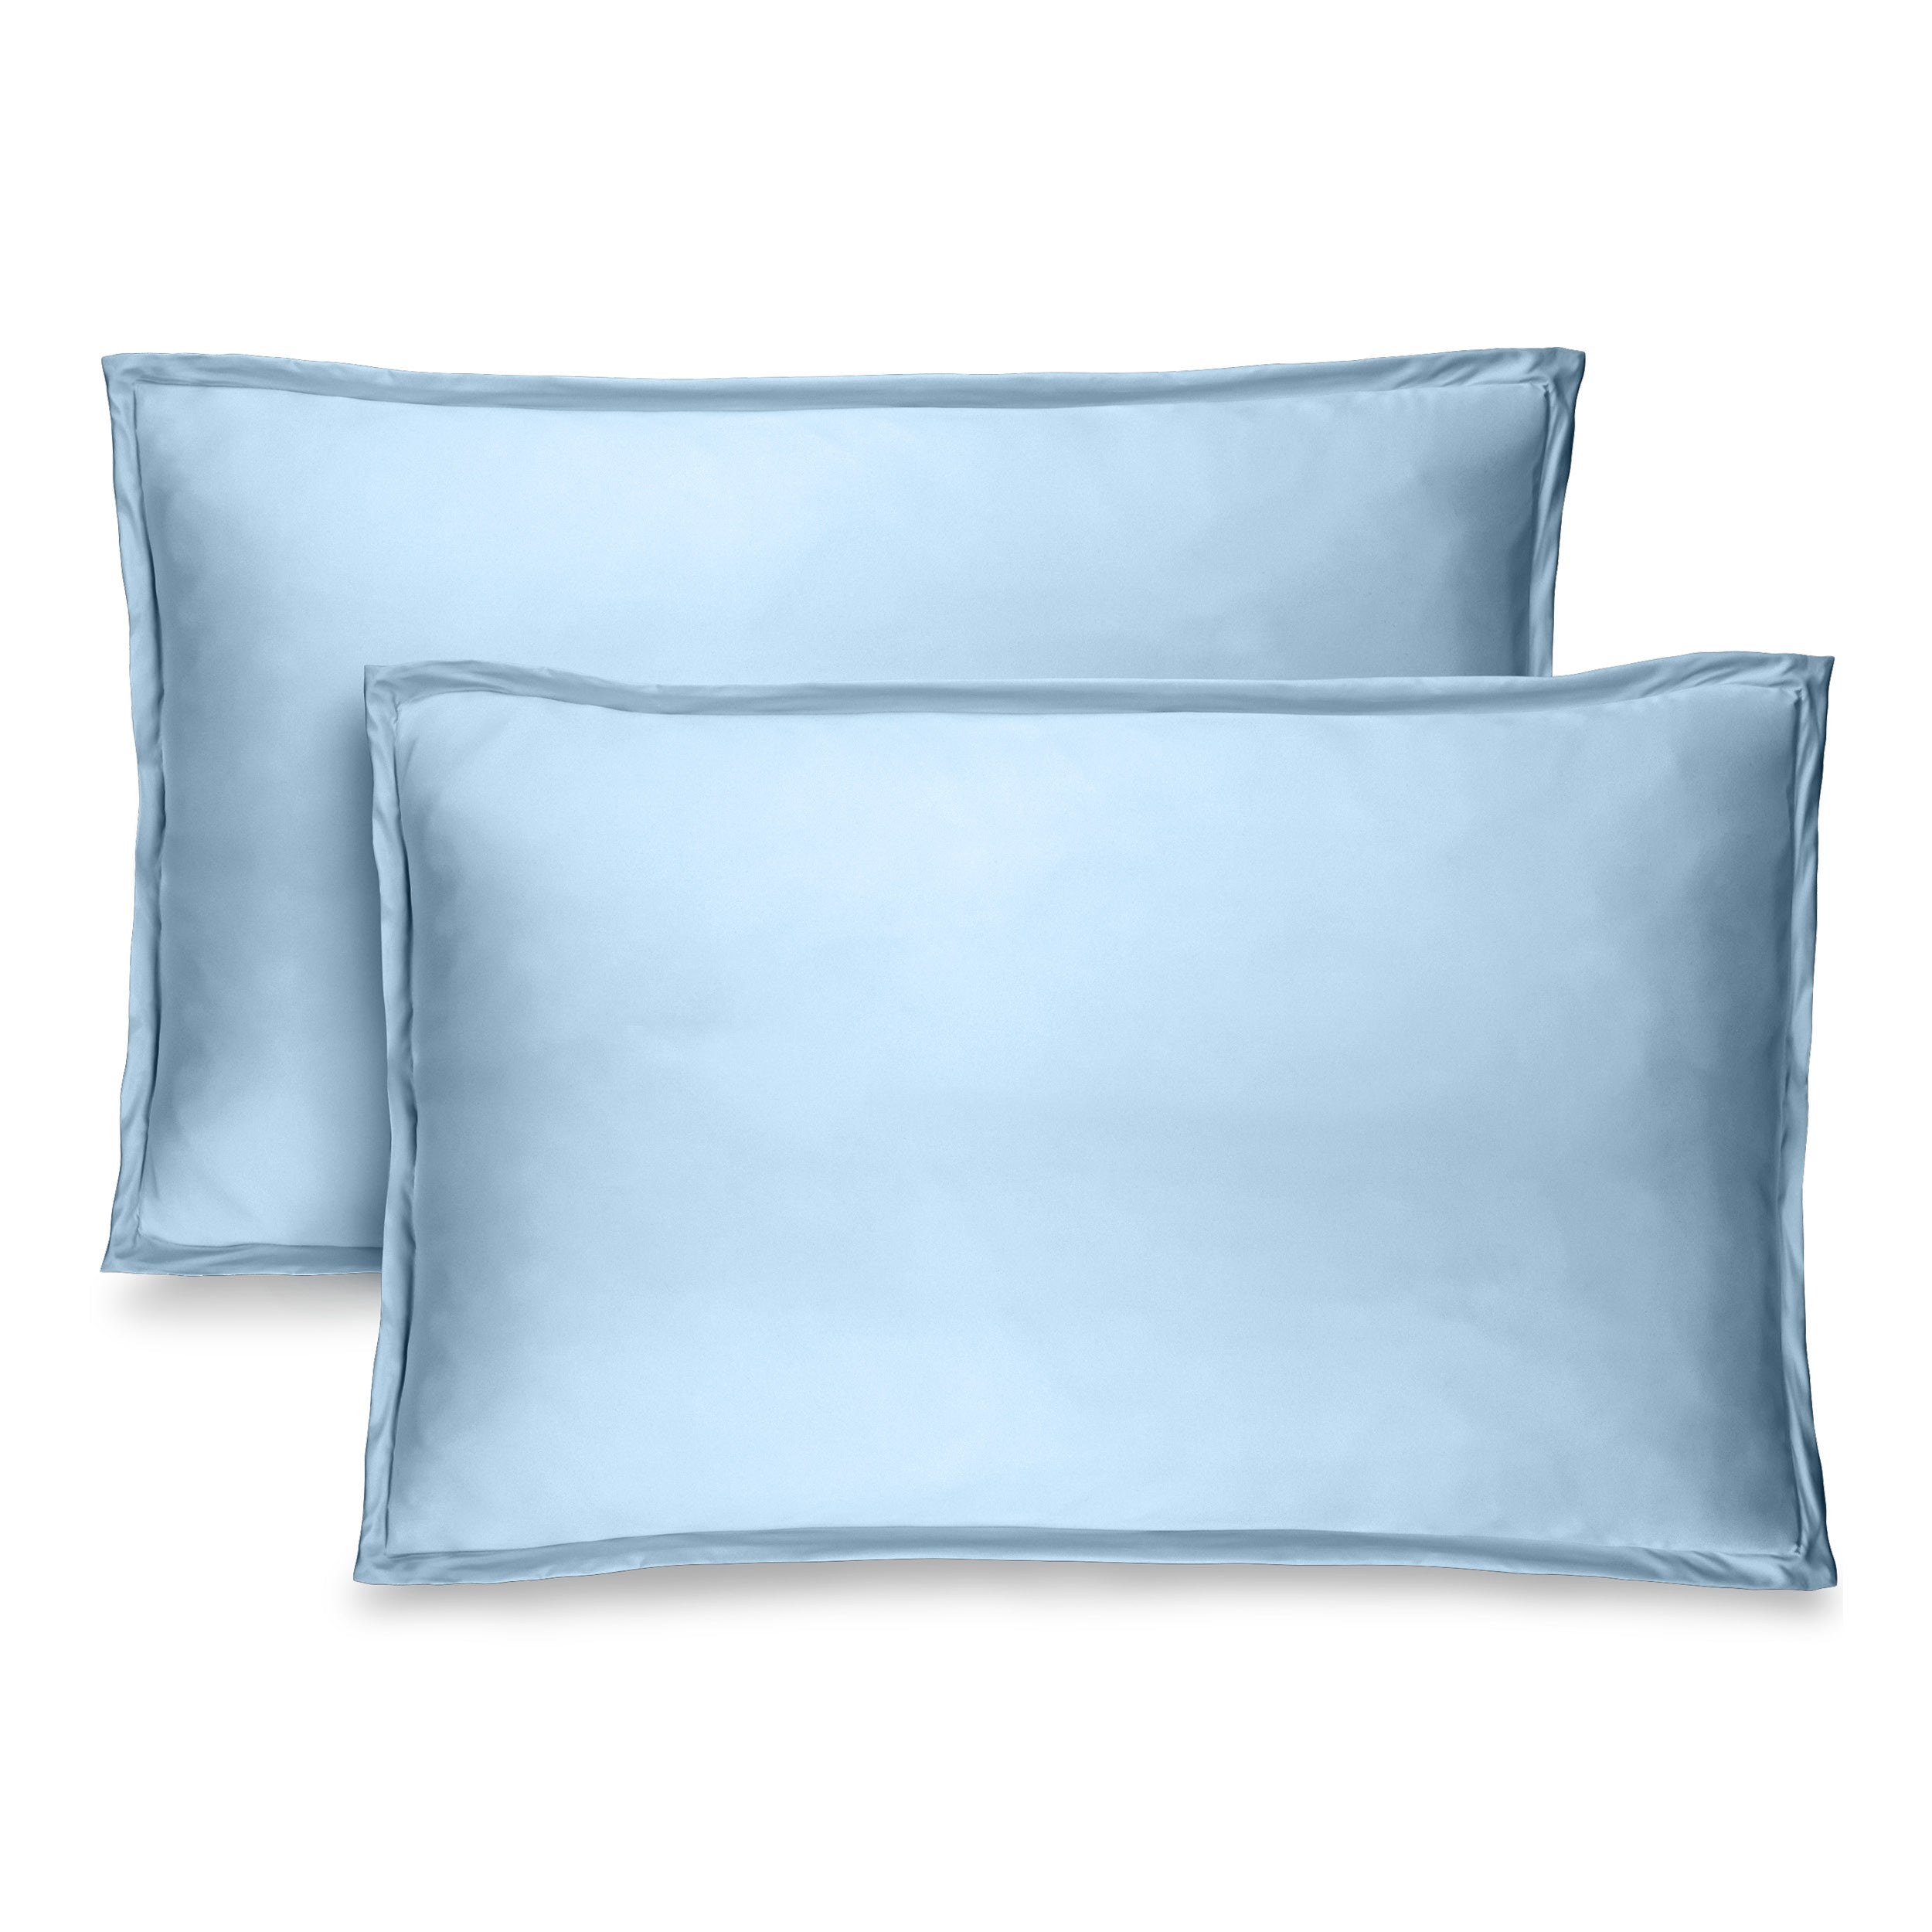 Two light blue pillow shams on pillows standing up with one behind the other